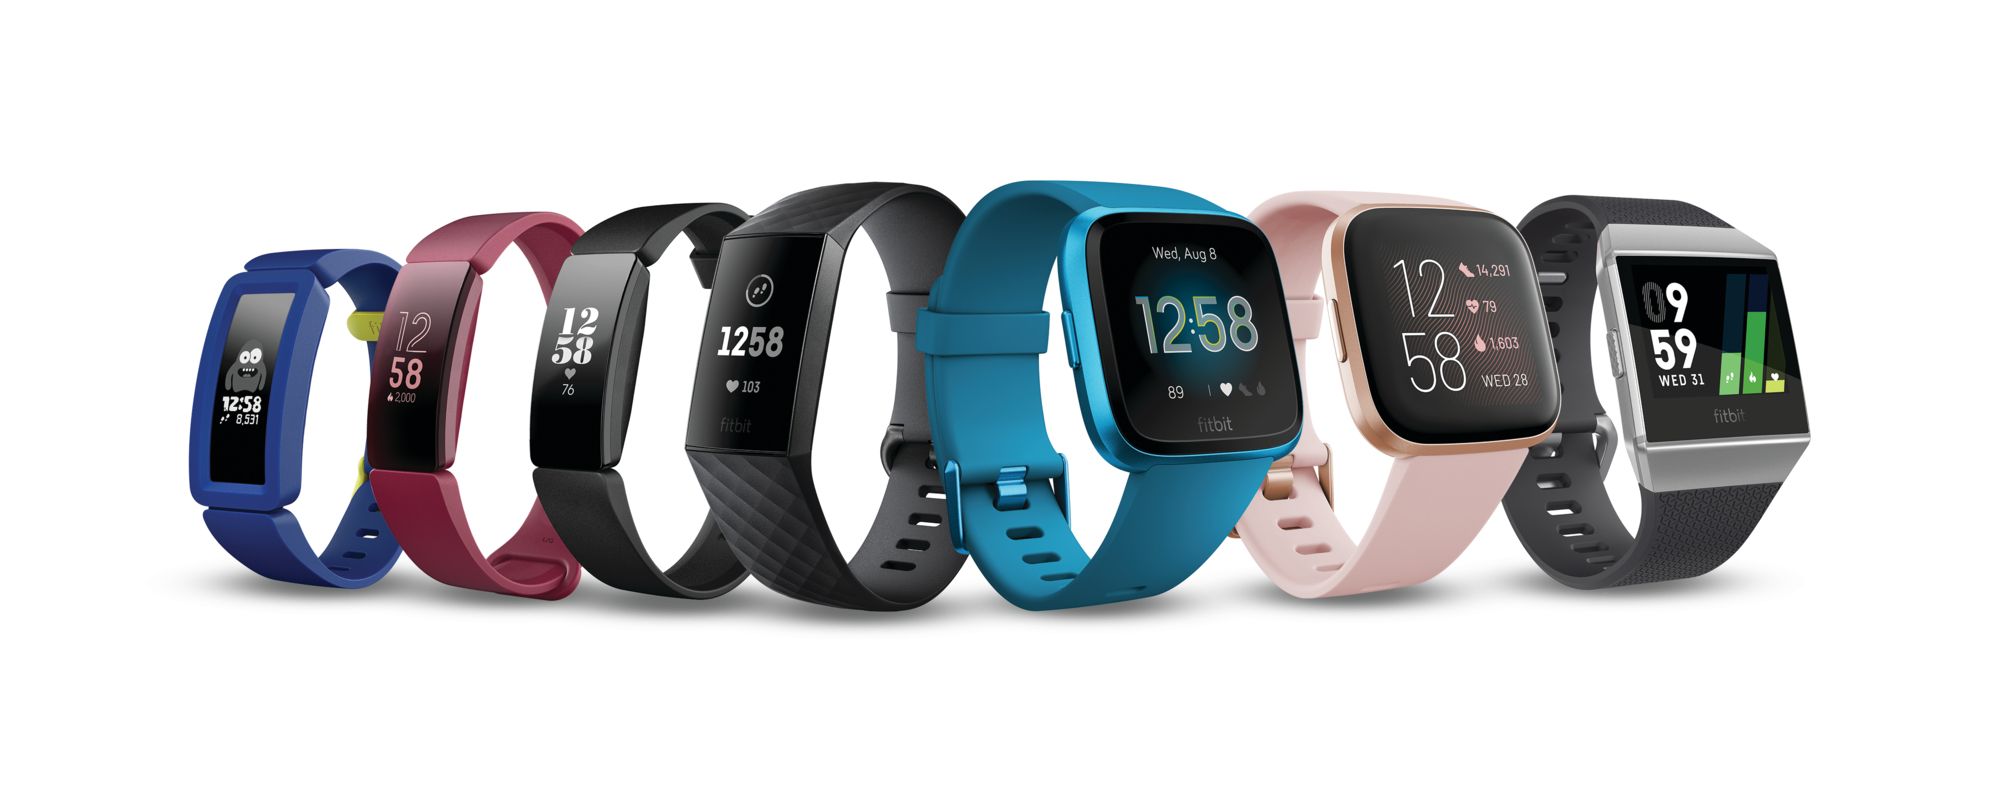 google to buy fitbit for $2.1 billion